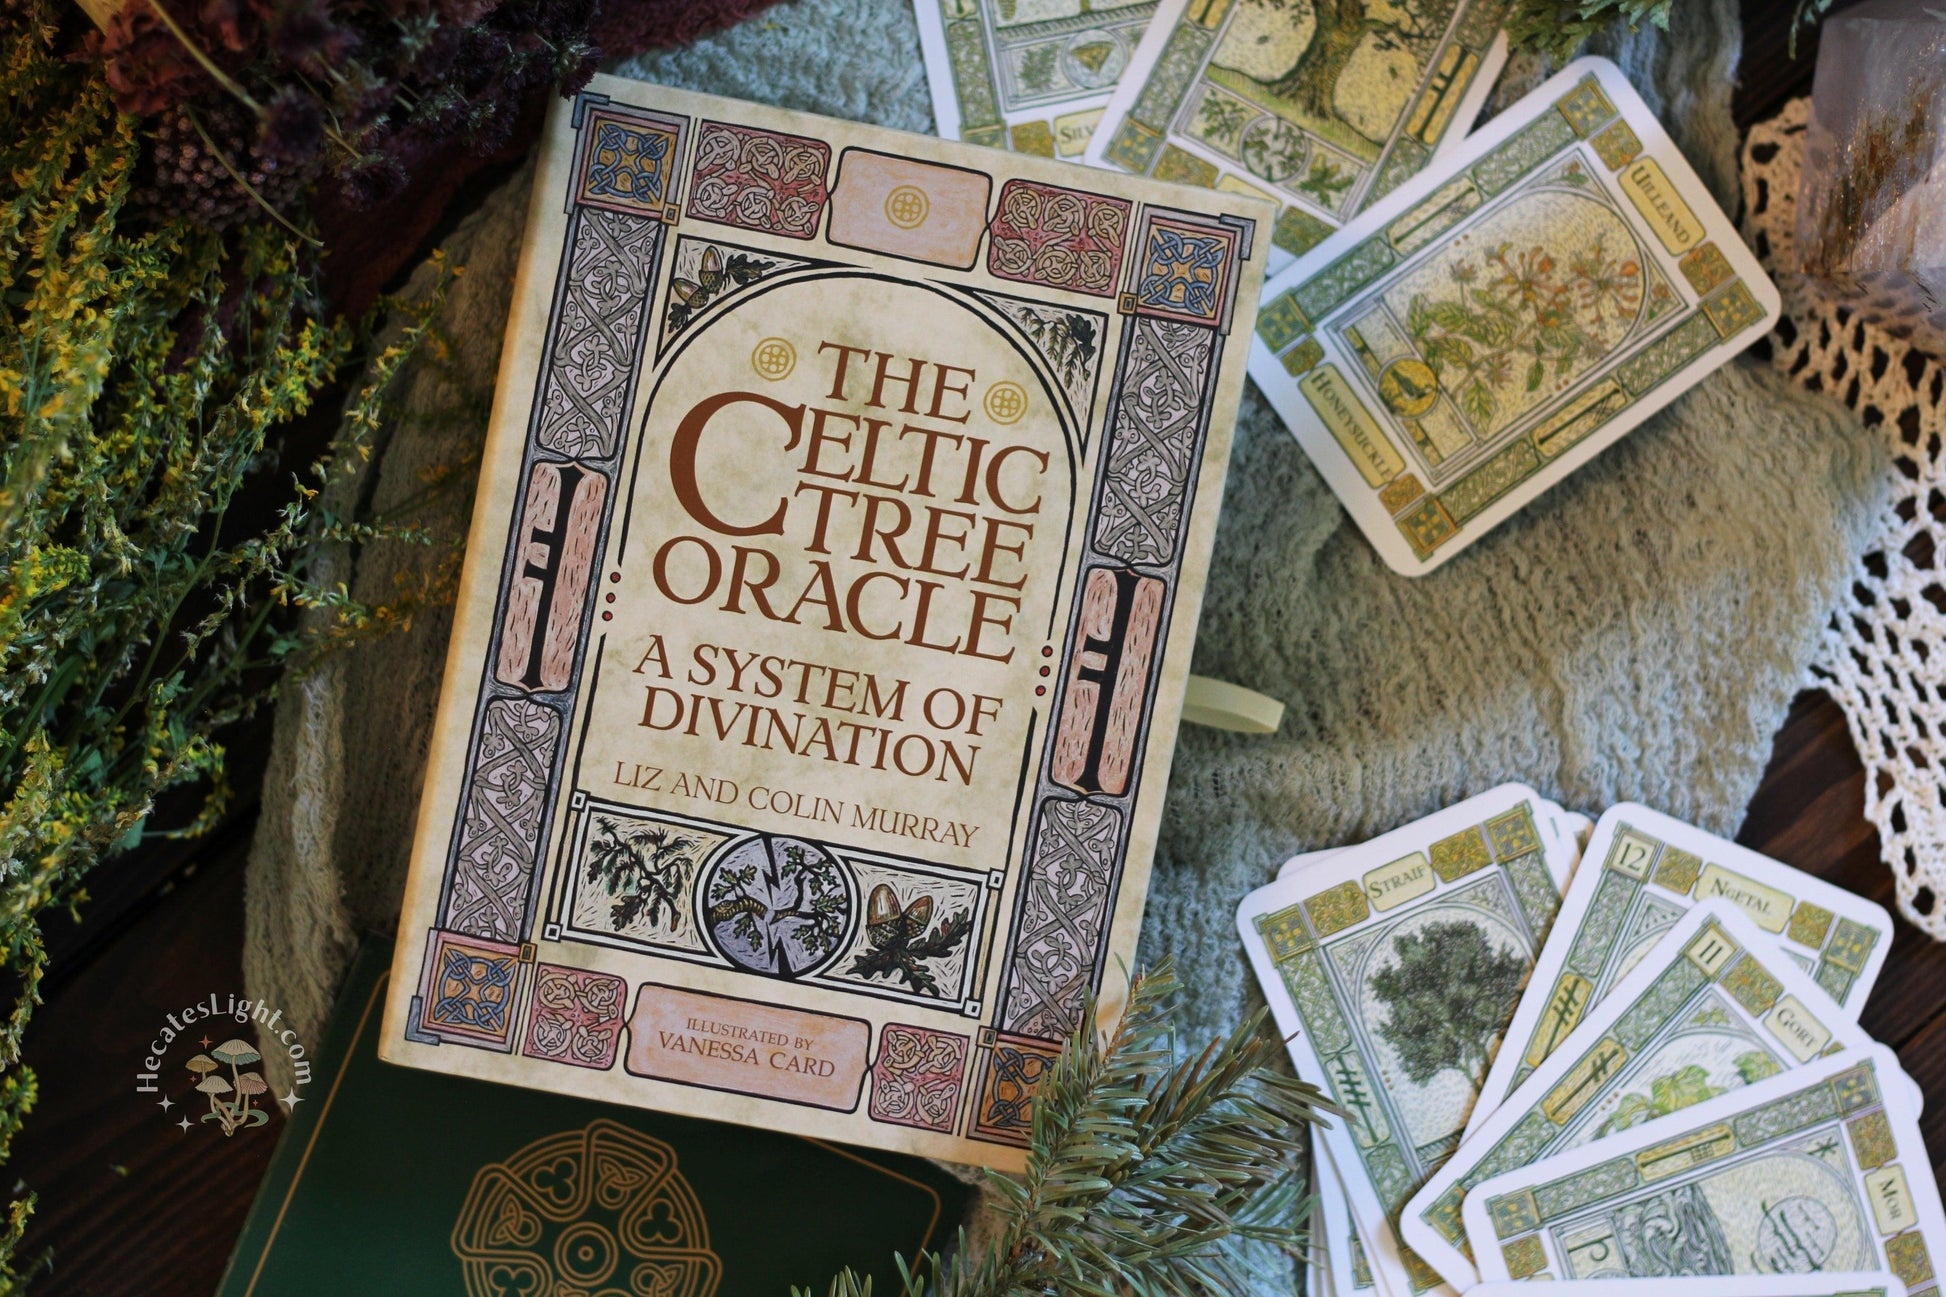 The Celtic Tree Oracle | A System of Divination Hecate's Light canada, canada cards, celtic, divination, divination tool, oracle, oracle deck, tarot card, tree The Celtic Tree Oracle | A System of Divination Hecate's Light calgary, canada, canada cards, celtic, divination, divination tool, oracle, oracle deck, tarot card, tree metaphysical occult supplies witchy hecateslight.com witchcraft cottagecore witch gifts metaphysical occult supplies witchy hecateslight.com witchcraft cottagecore witch gifts